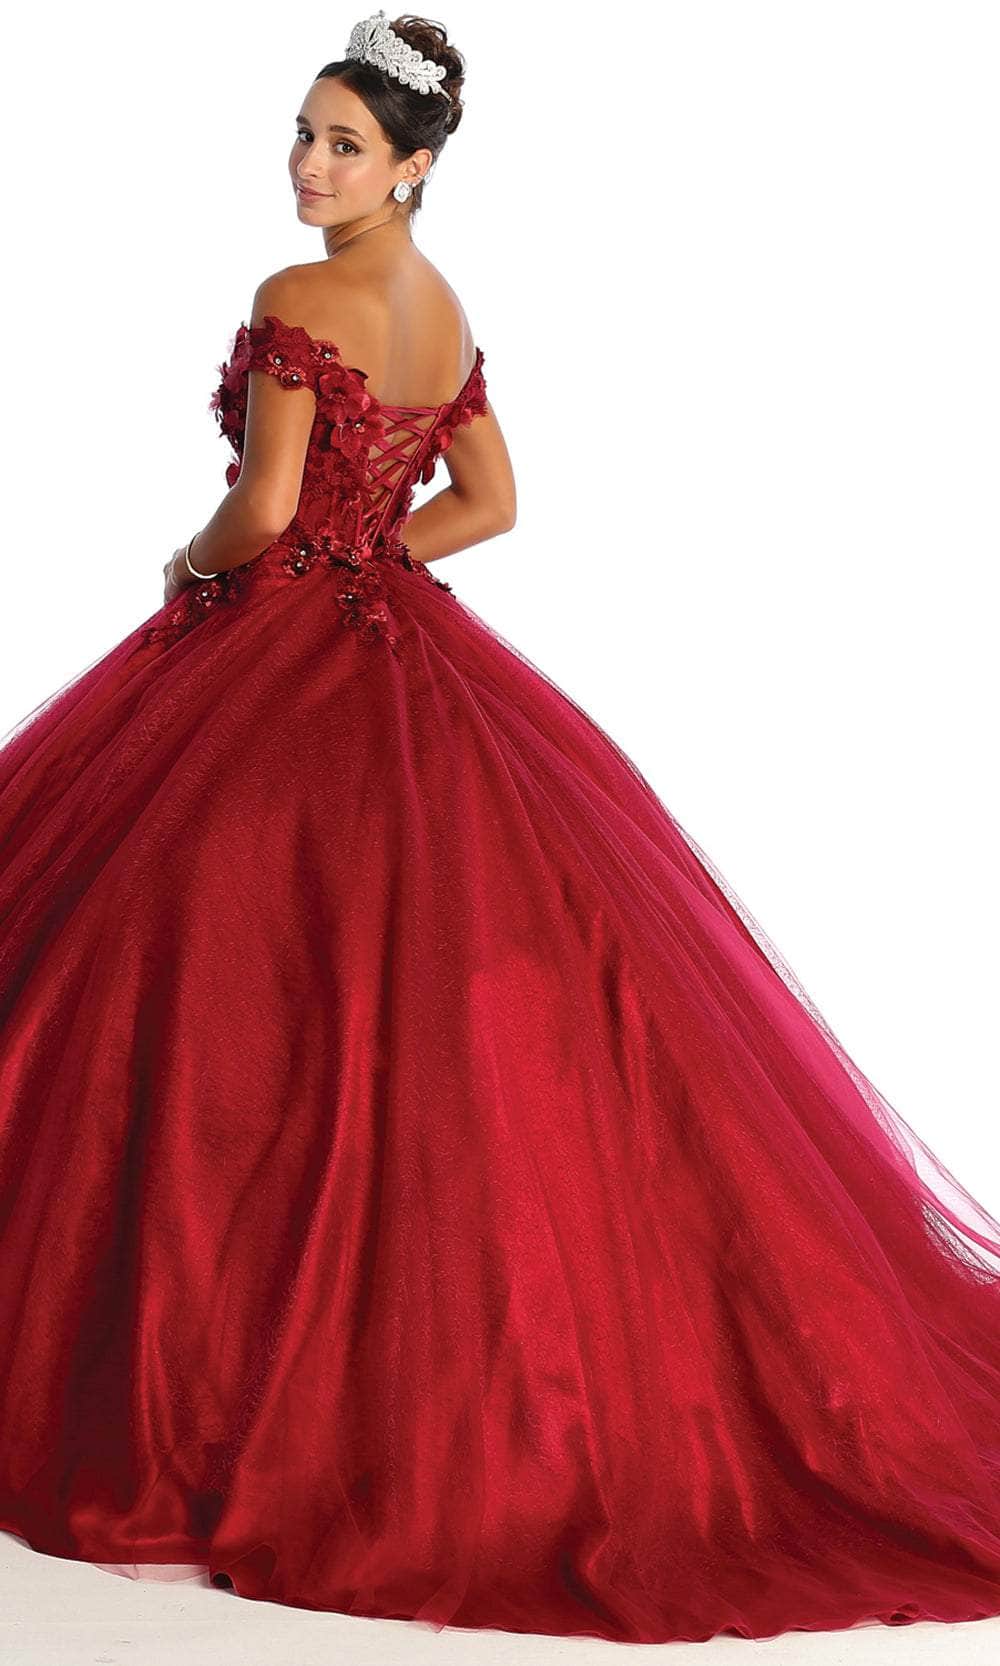 May Queen LK166 - Off Shoulder Applique Prom Ballgown Ball Gowns